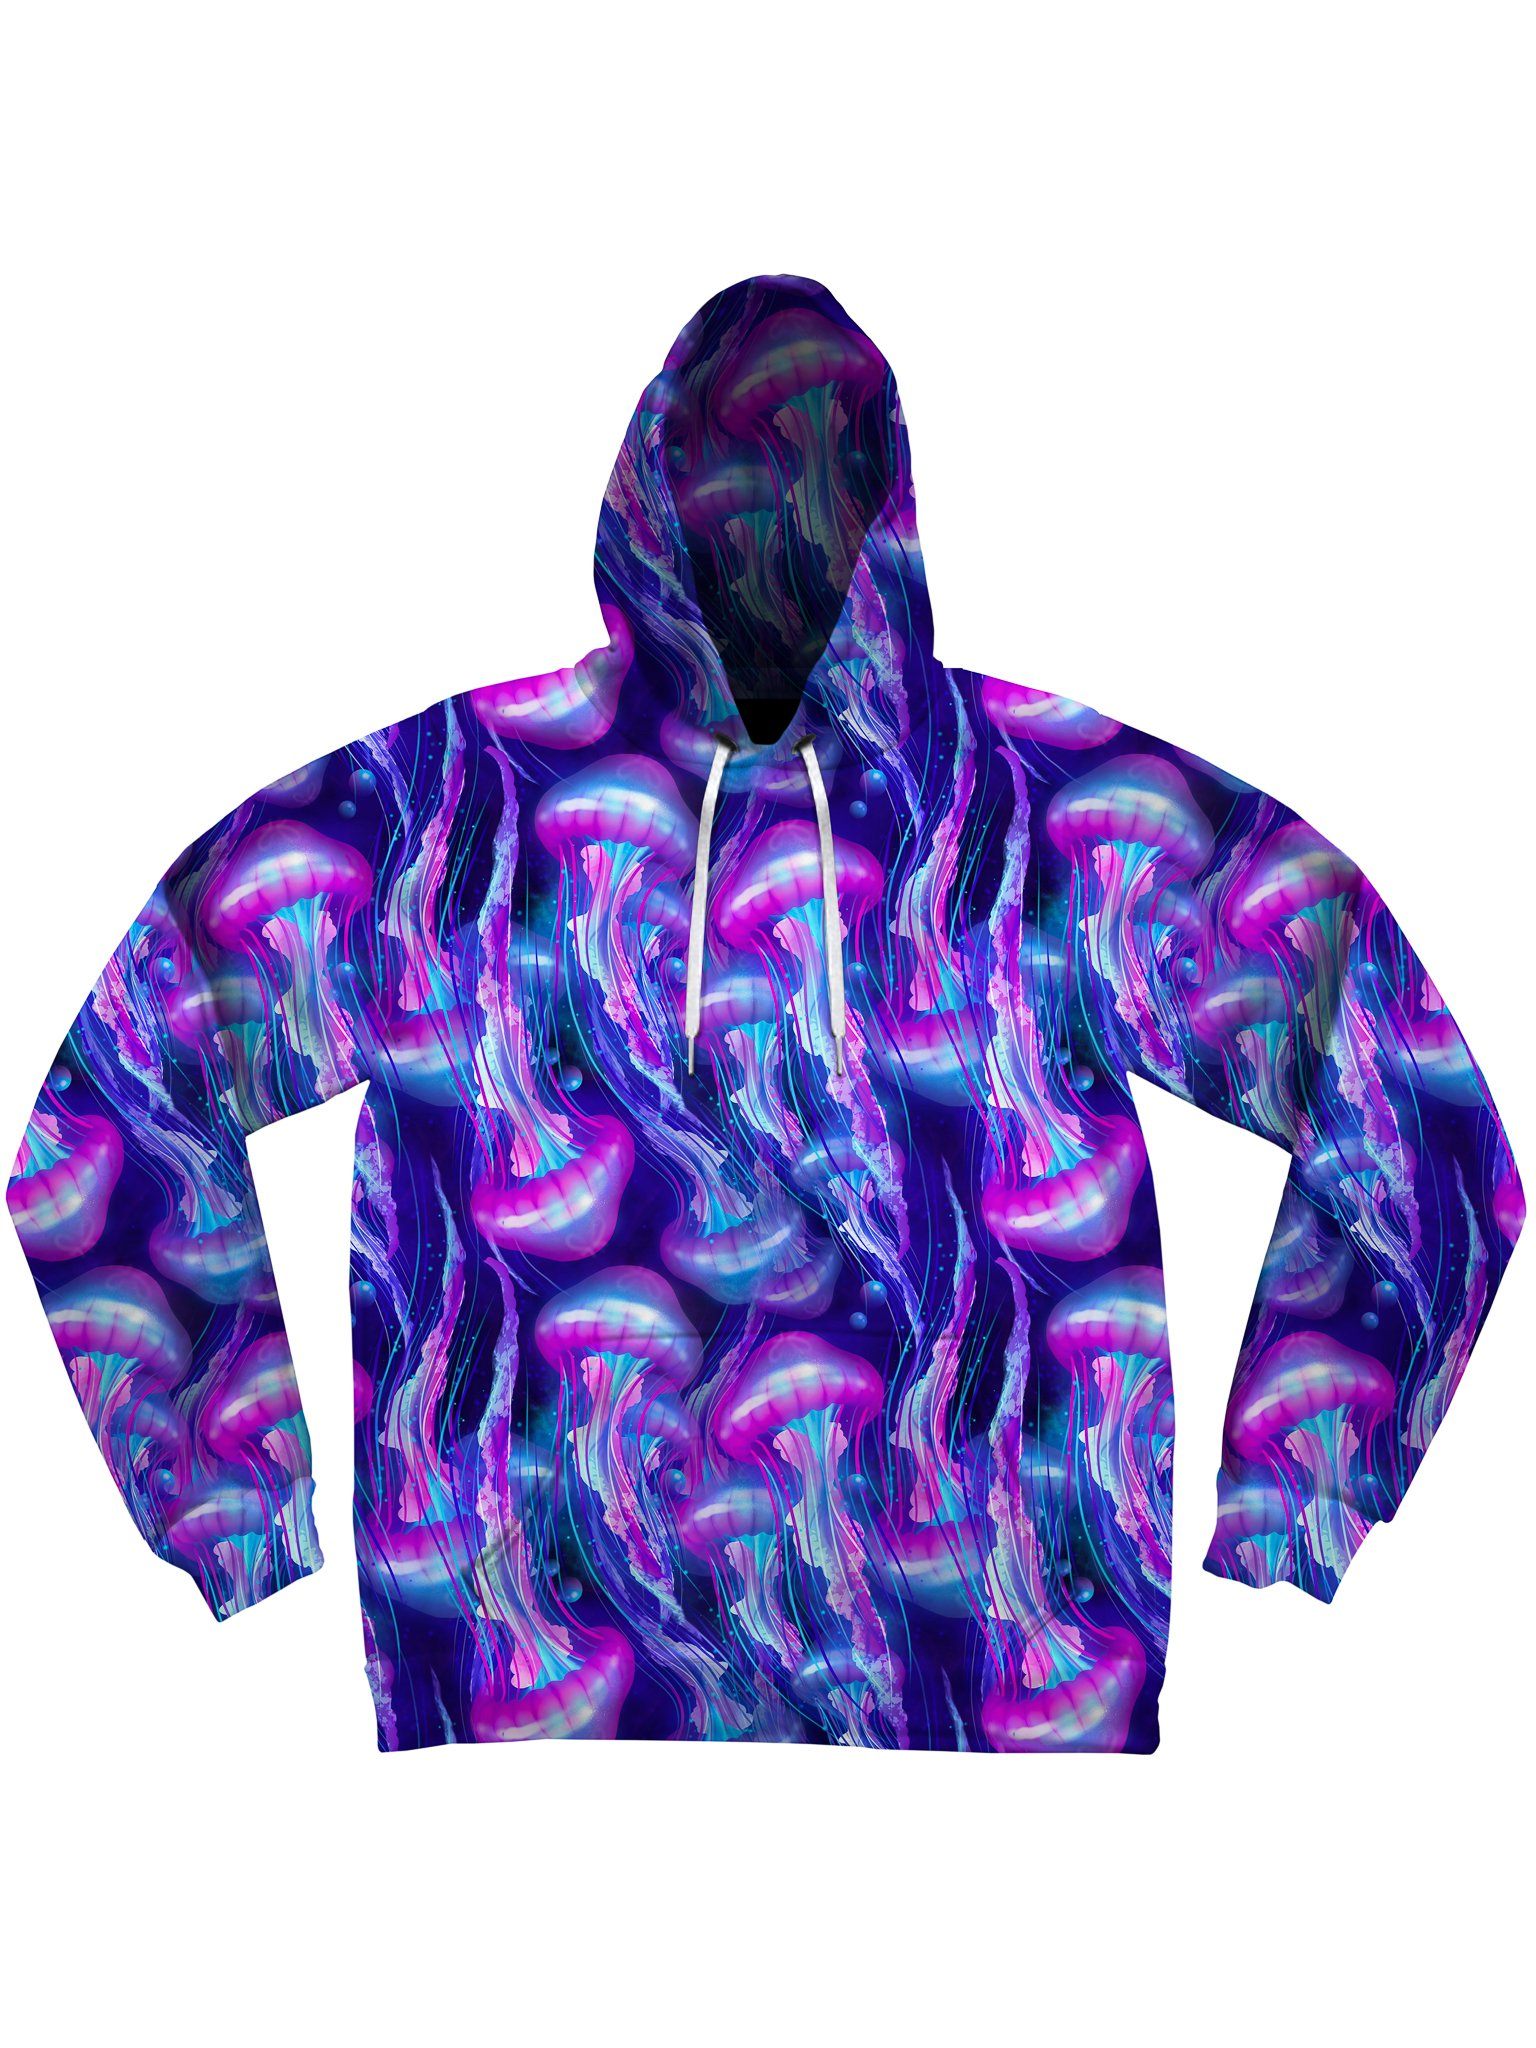 You Jelly? Unisex Hoodie Pullover Hoodies Electro Threads 